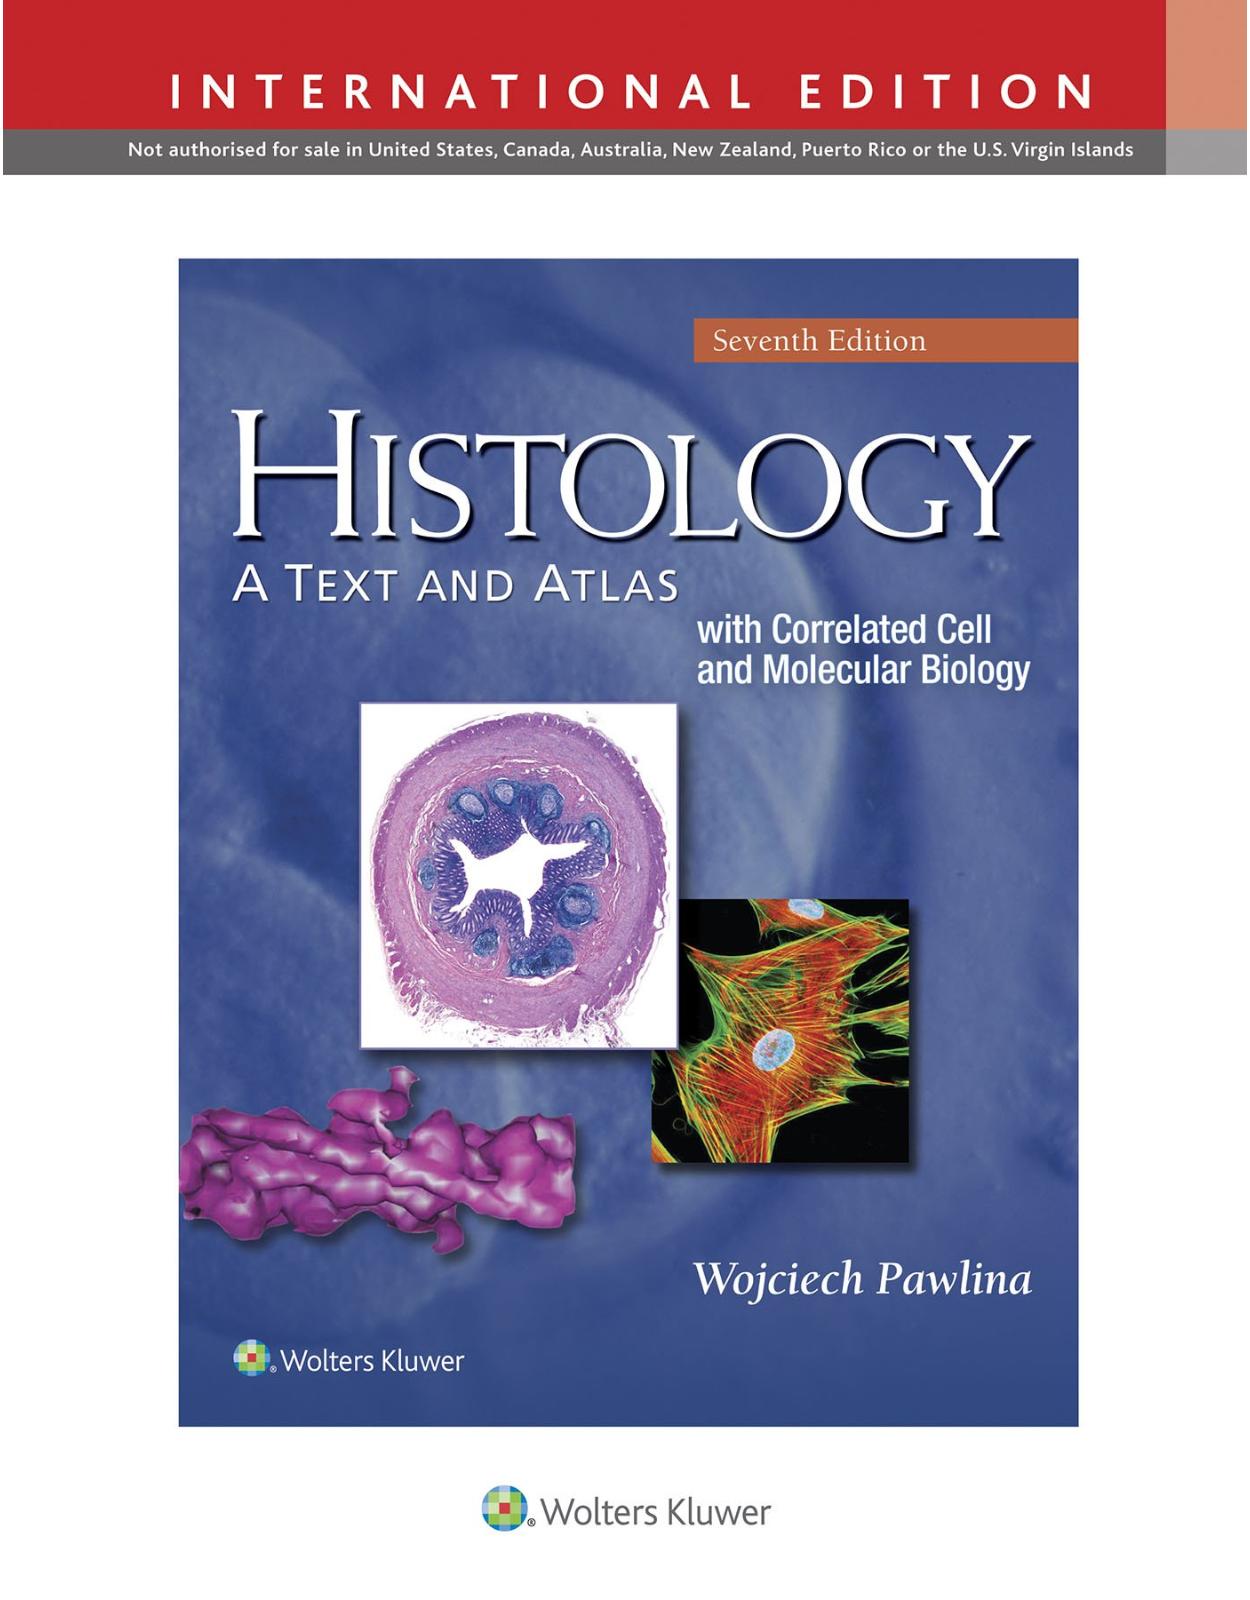  Histology: A Text and Atlas, 7e WITH CORRELATED CELL AND MOLECULAR BIOLOGY